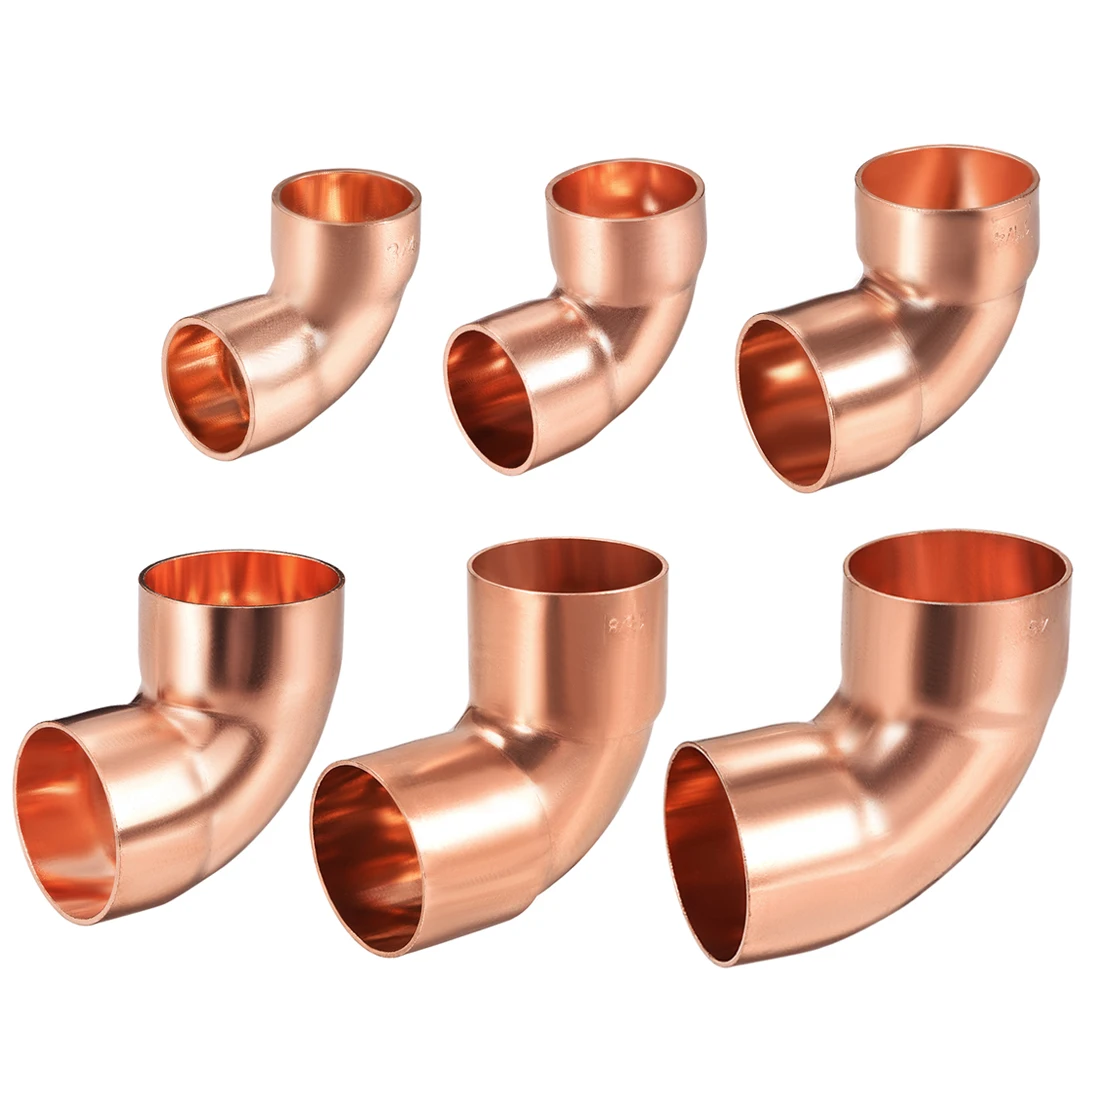 Copper Pipe Fittings ( Elbow, Tee, Connector , Reducer) at Rs 40/piece, Copper Products in New Delhi